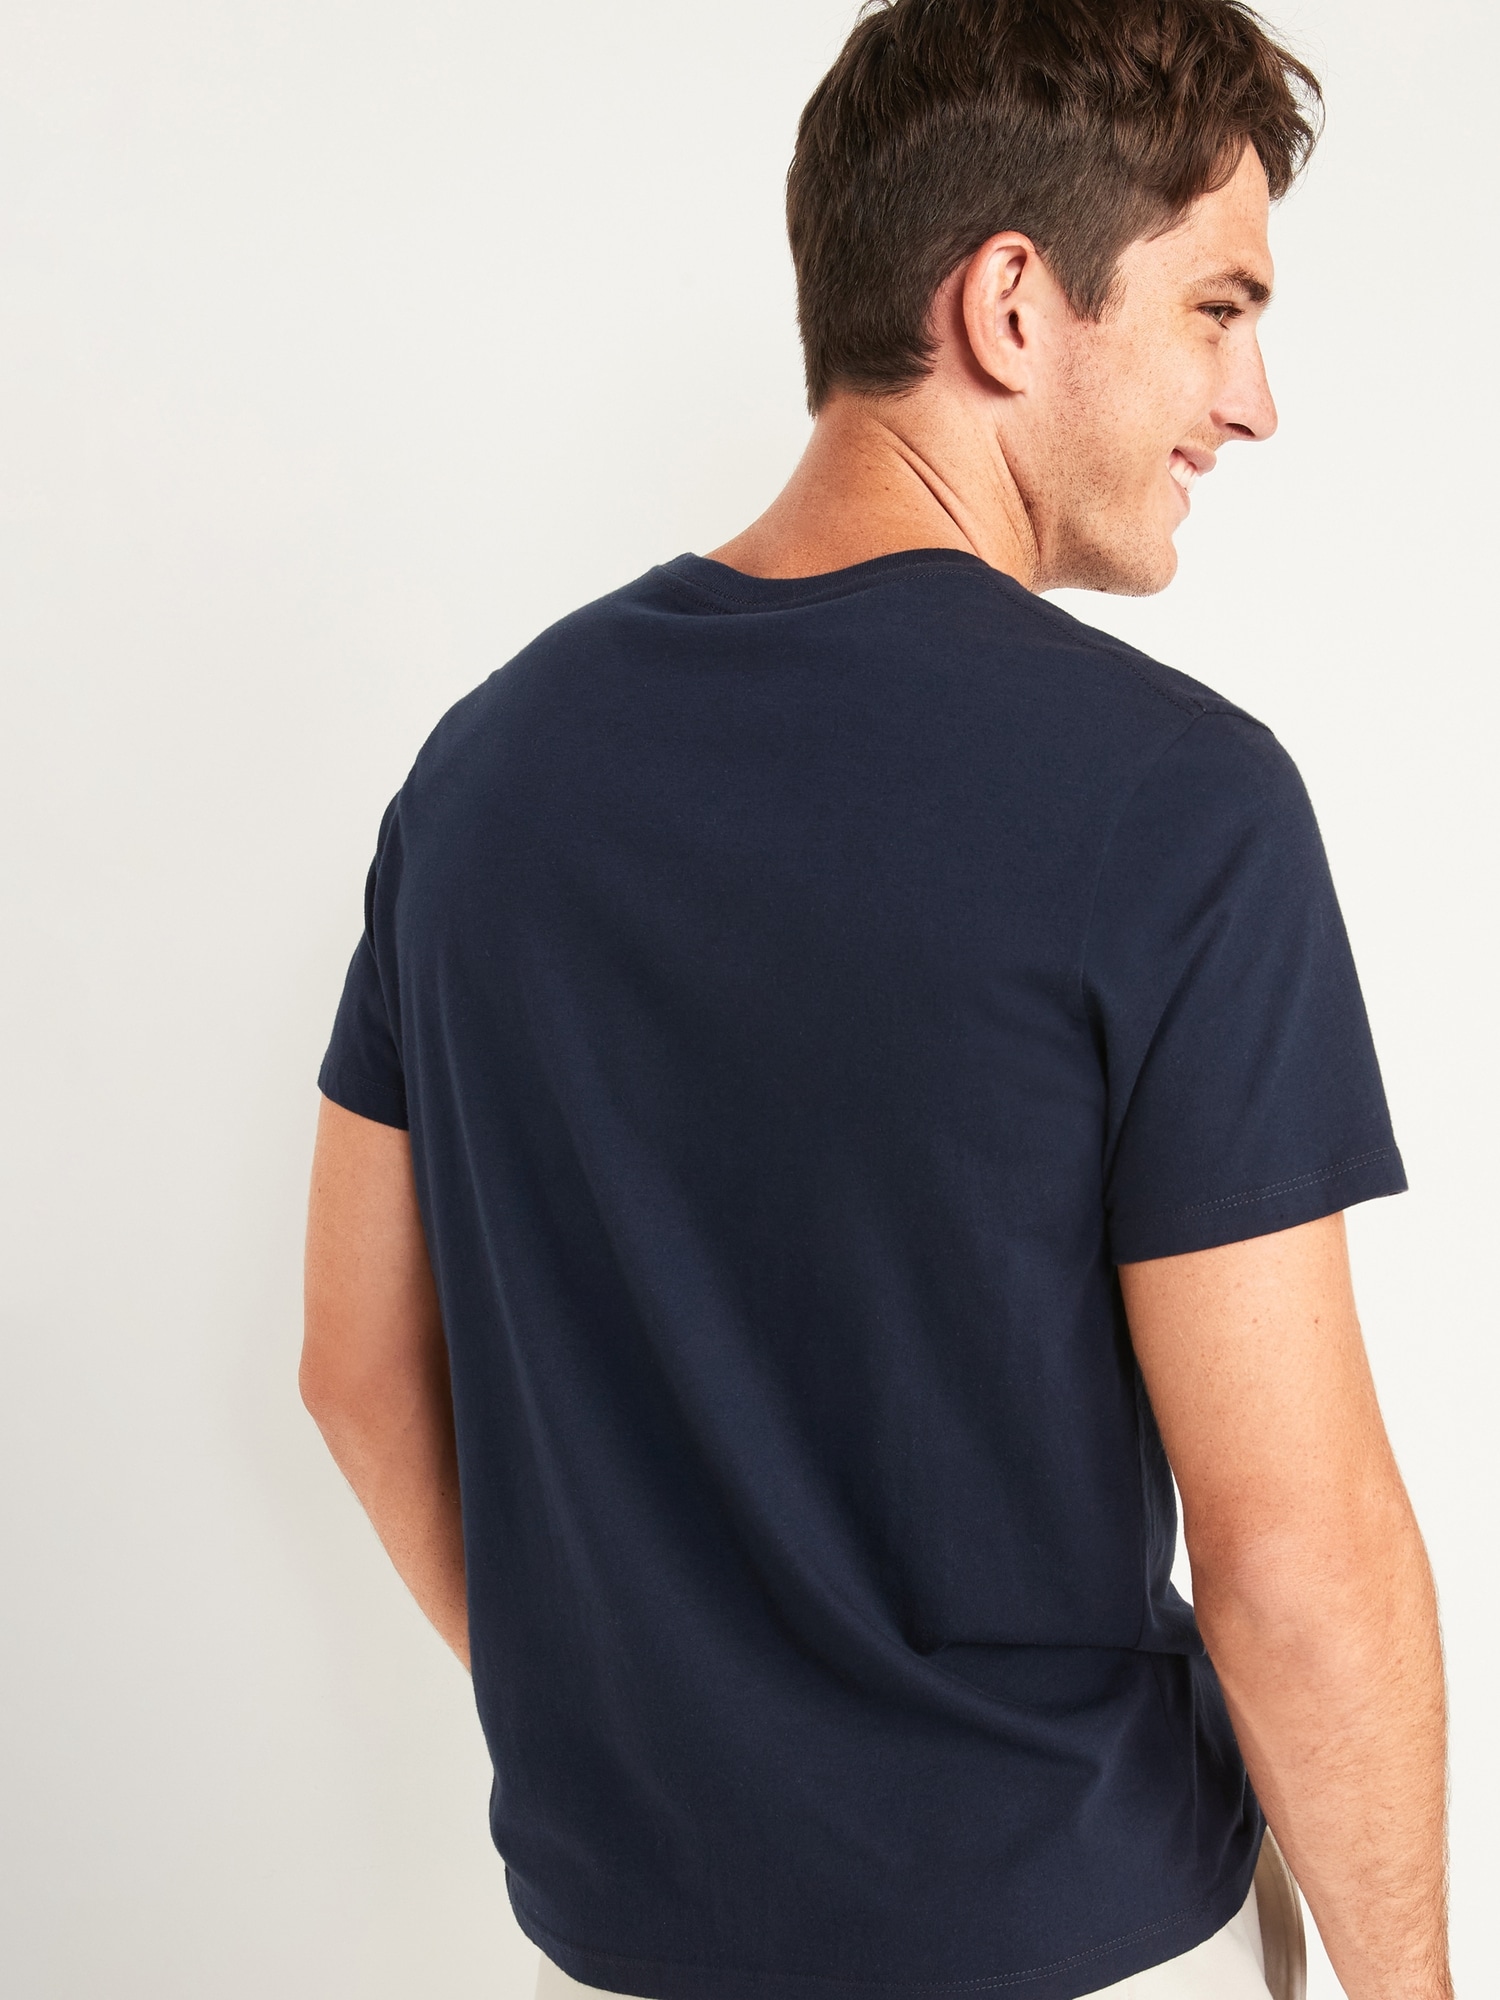 Champion Authentic Originals Mens Soft-Wash Short Sleeve T-Shirt❗️Ships Directly from Hanes❗️❗️Ships Directly from Han❗️Ships Directly from Hanes❗️ Navy Heather